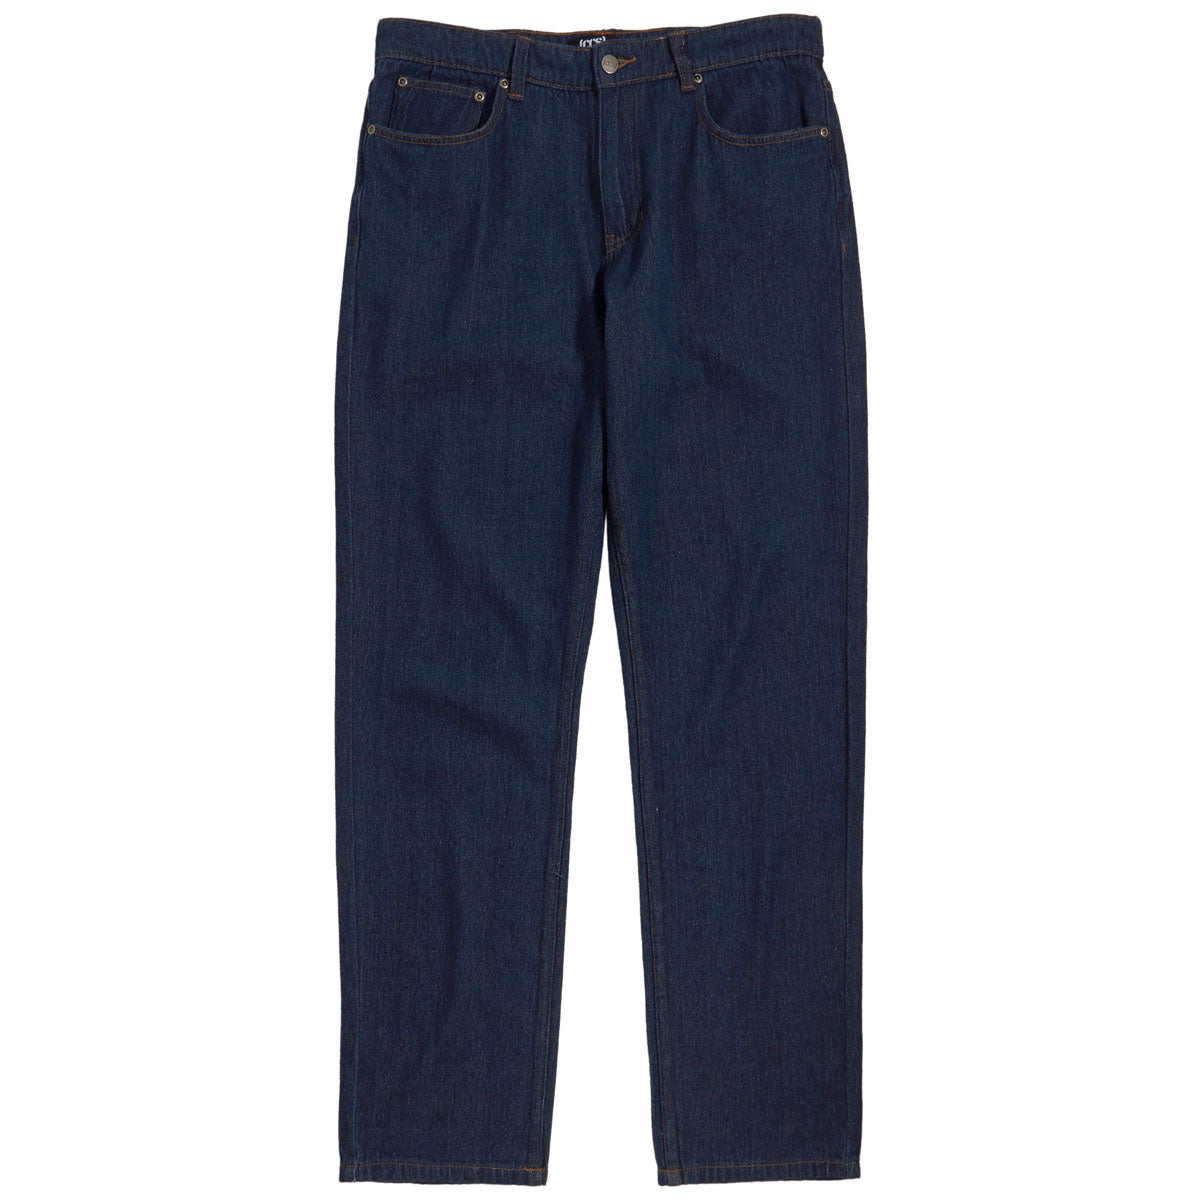 CCS Standard Plus Relaxed Denim Jeans - Raw image 3